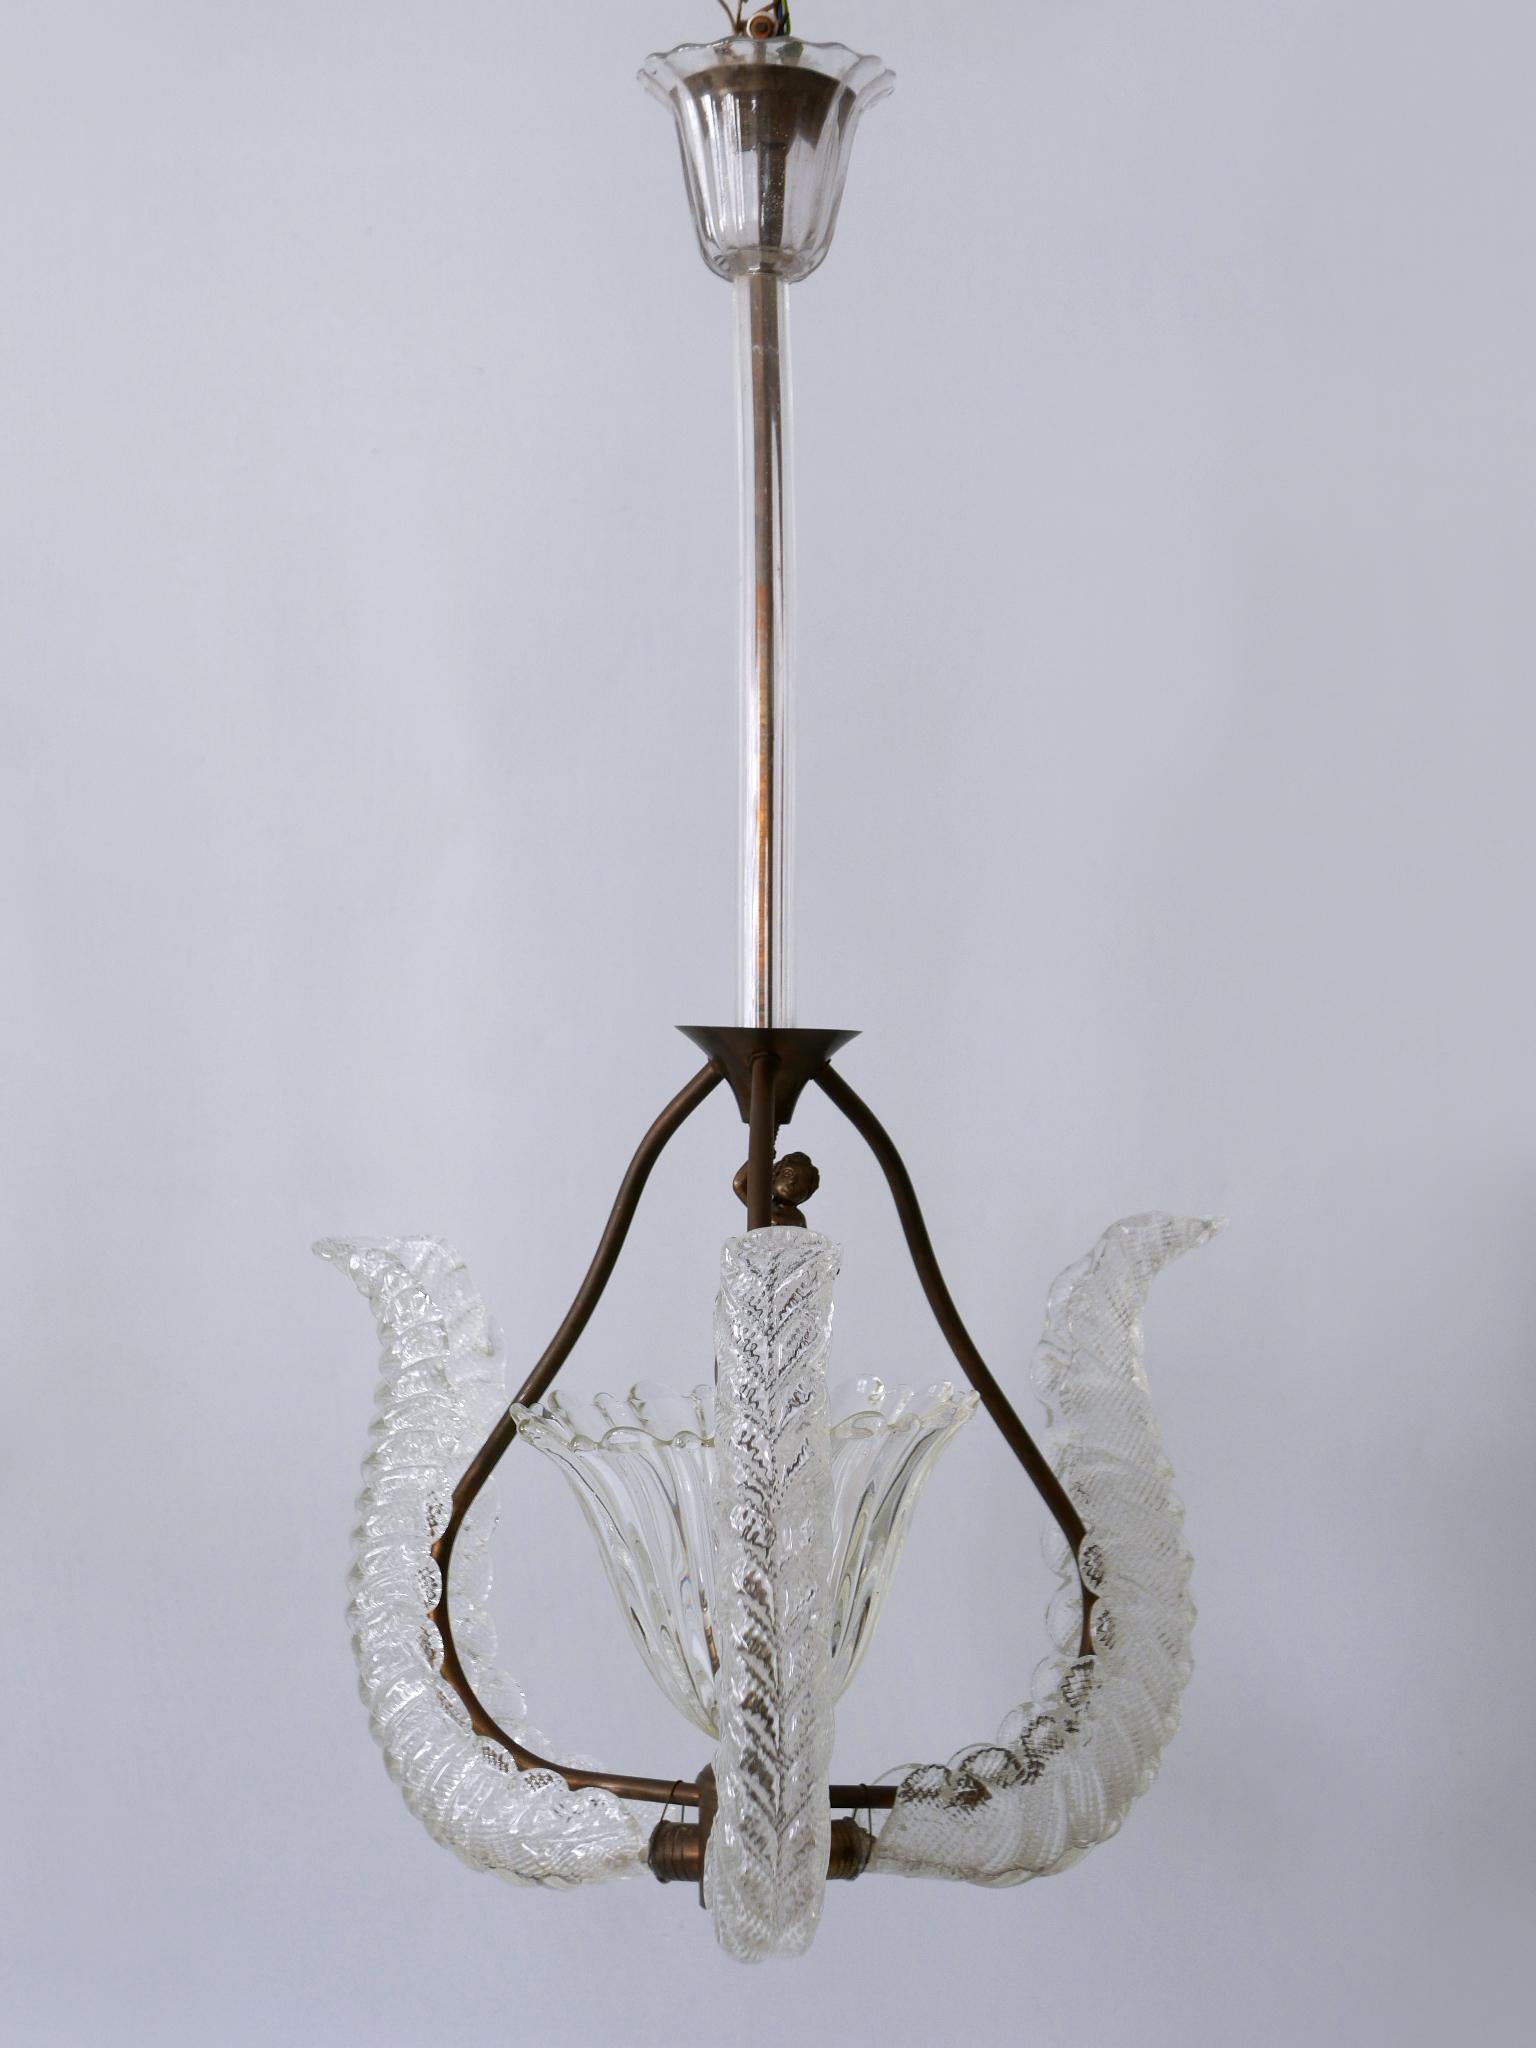 Mid-20th Century Rare Mid Century Modern Chandelier or Pendant Lamp 'Putti' by Barovier & Toso For Sale